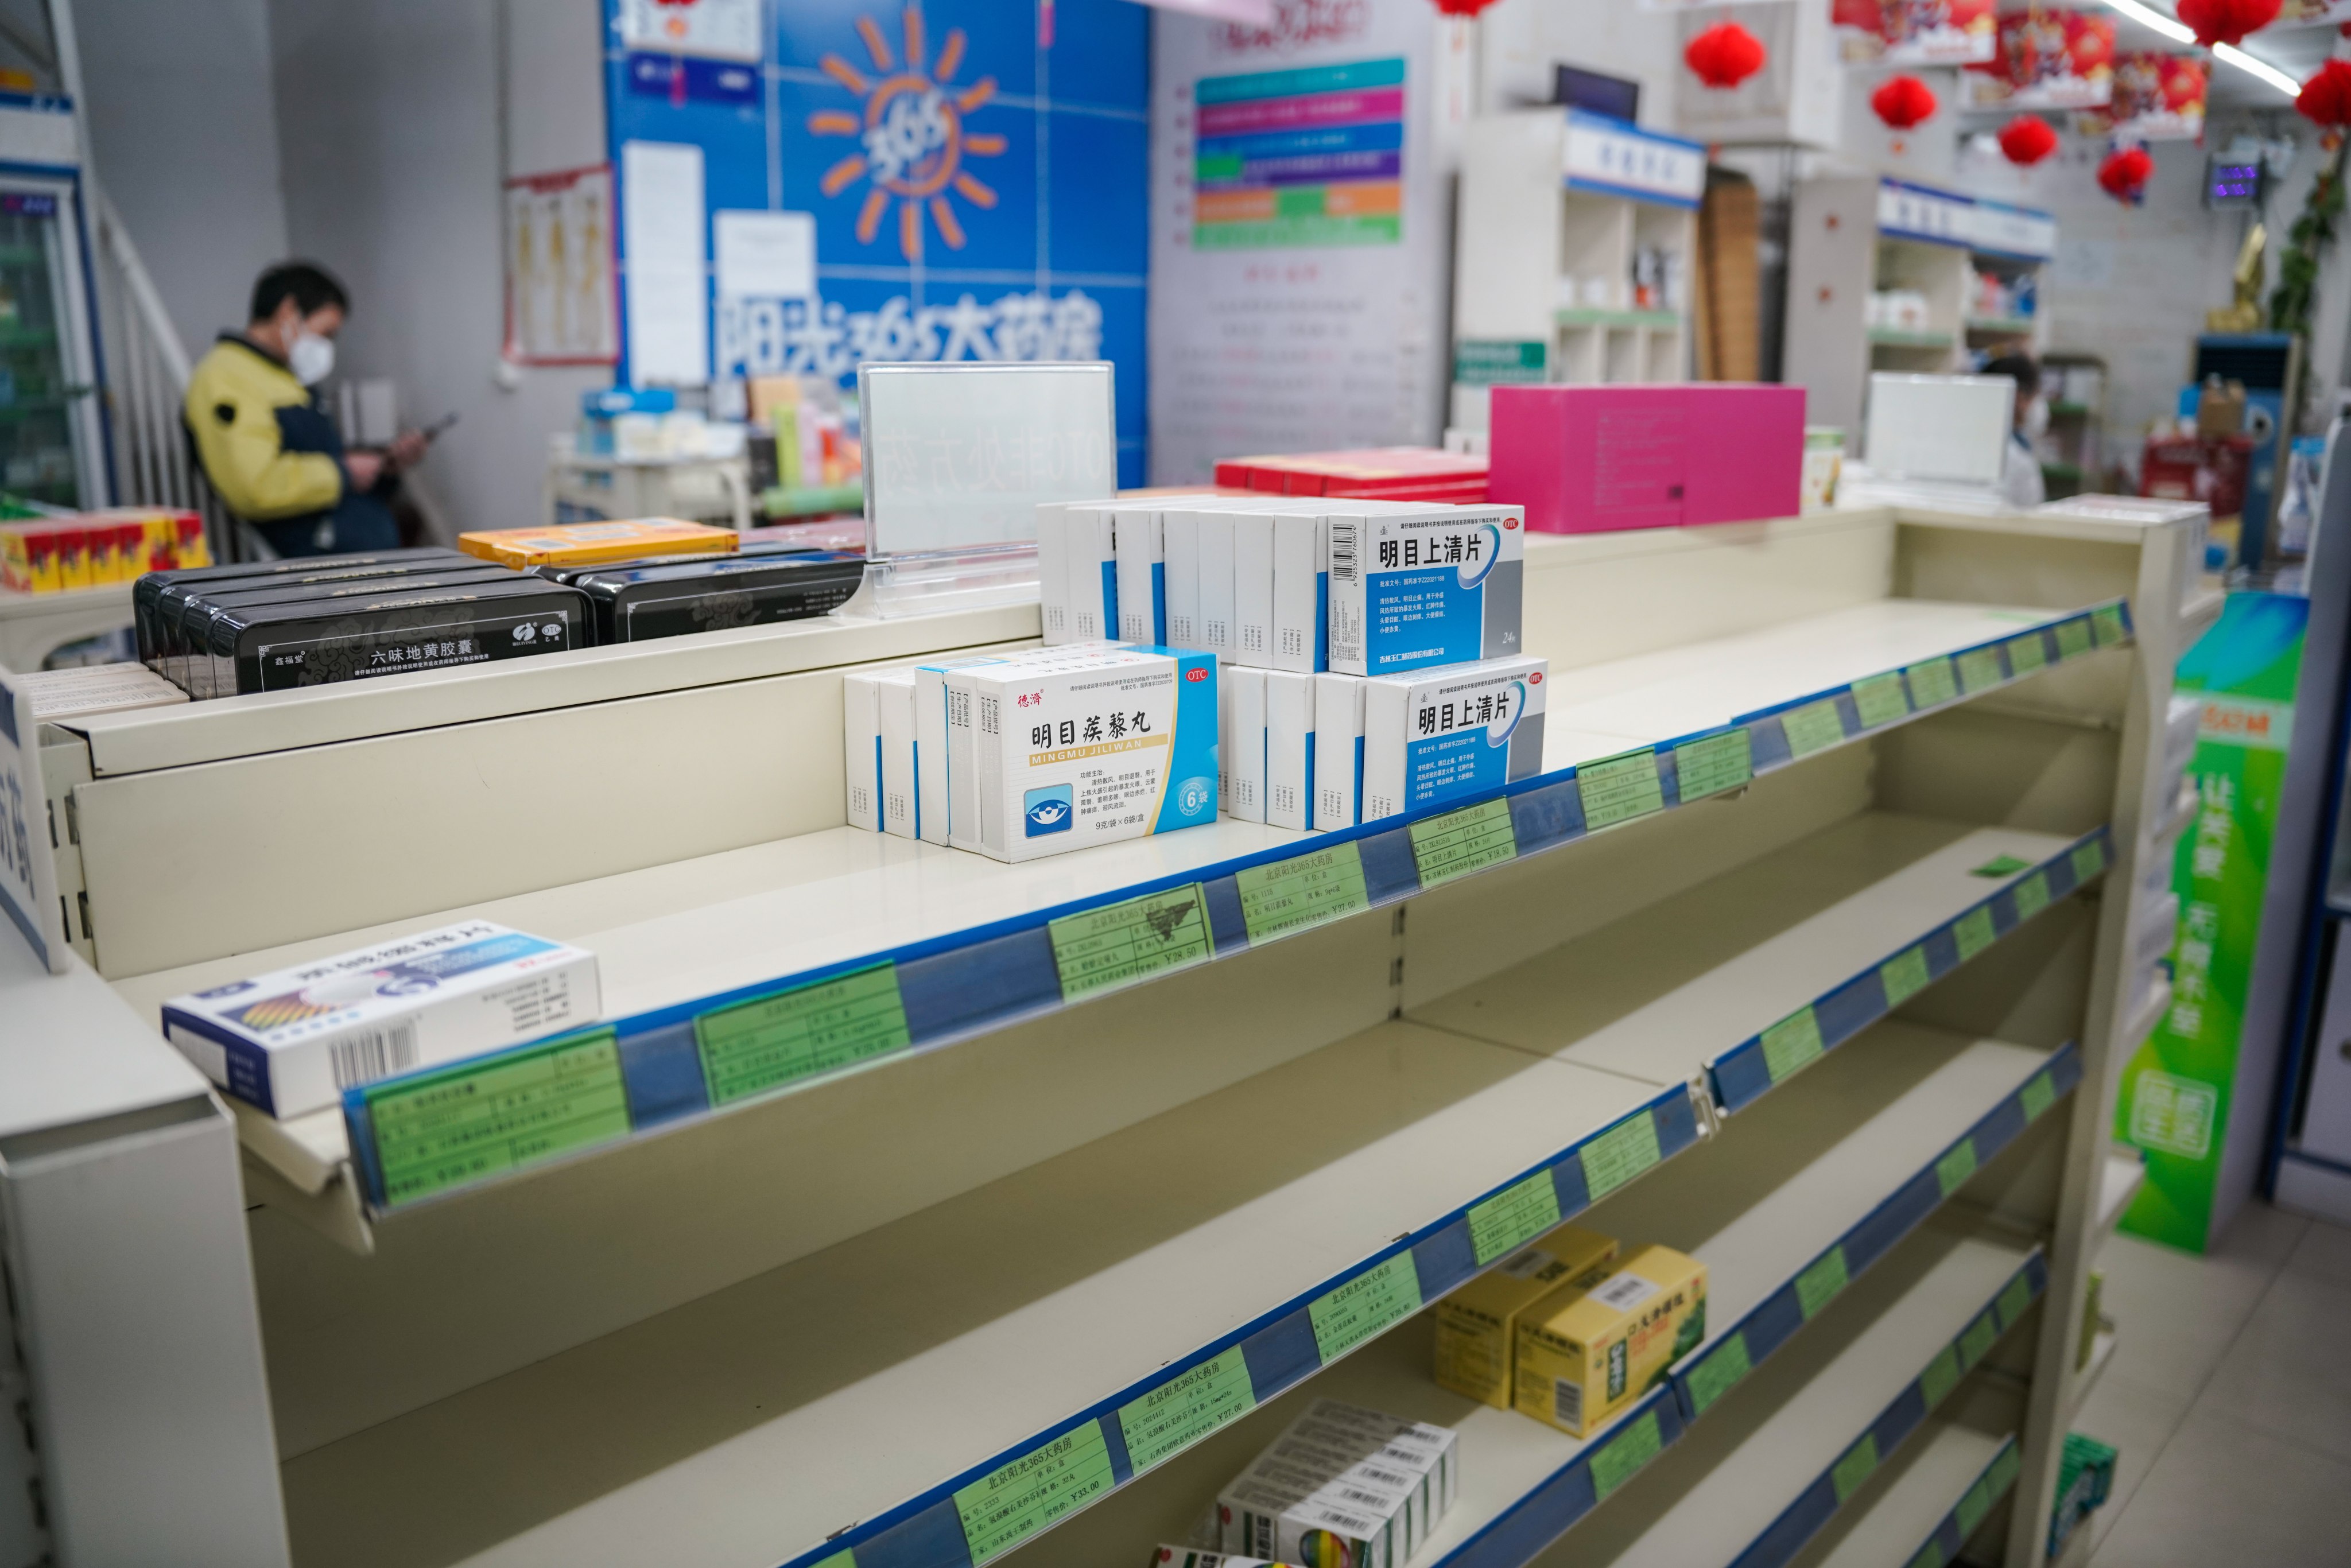 In China, as Covid-19 infections rise, people anticipating a winter wave are buying more medicines, reportedly causing a shortage of cold and flu medicines across China. In Chongqing, profiteers have been put on notice. Photo: EPA-EFE